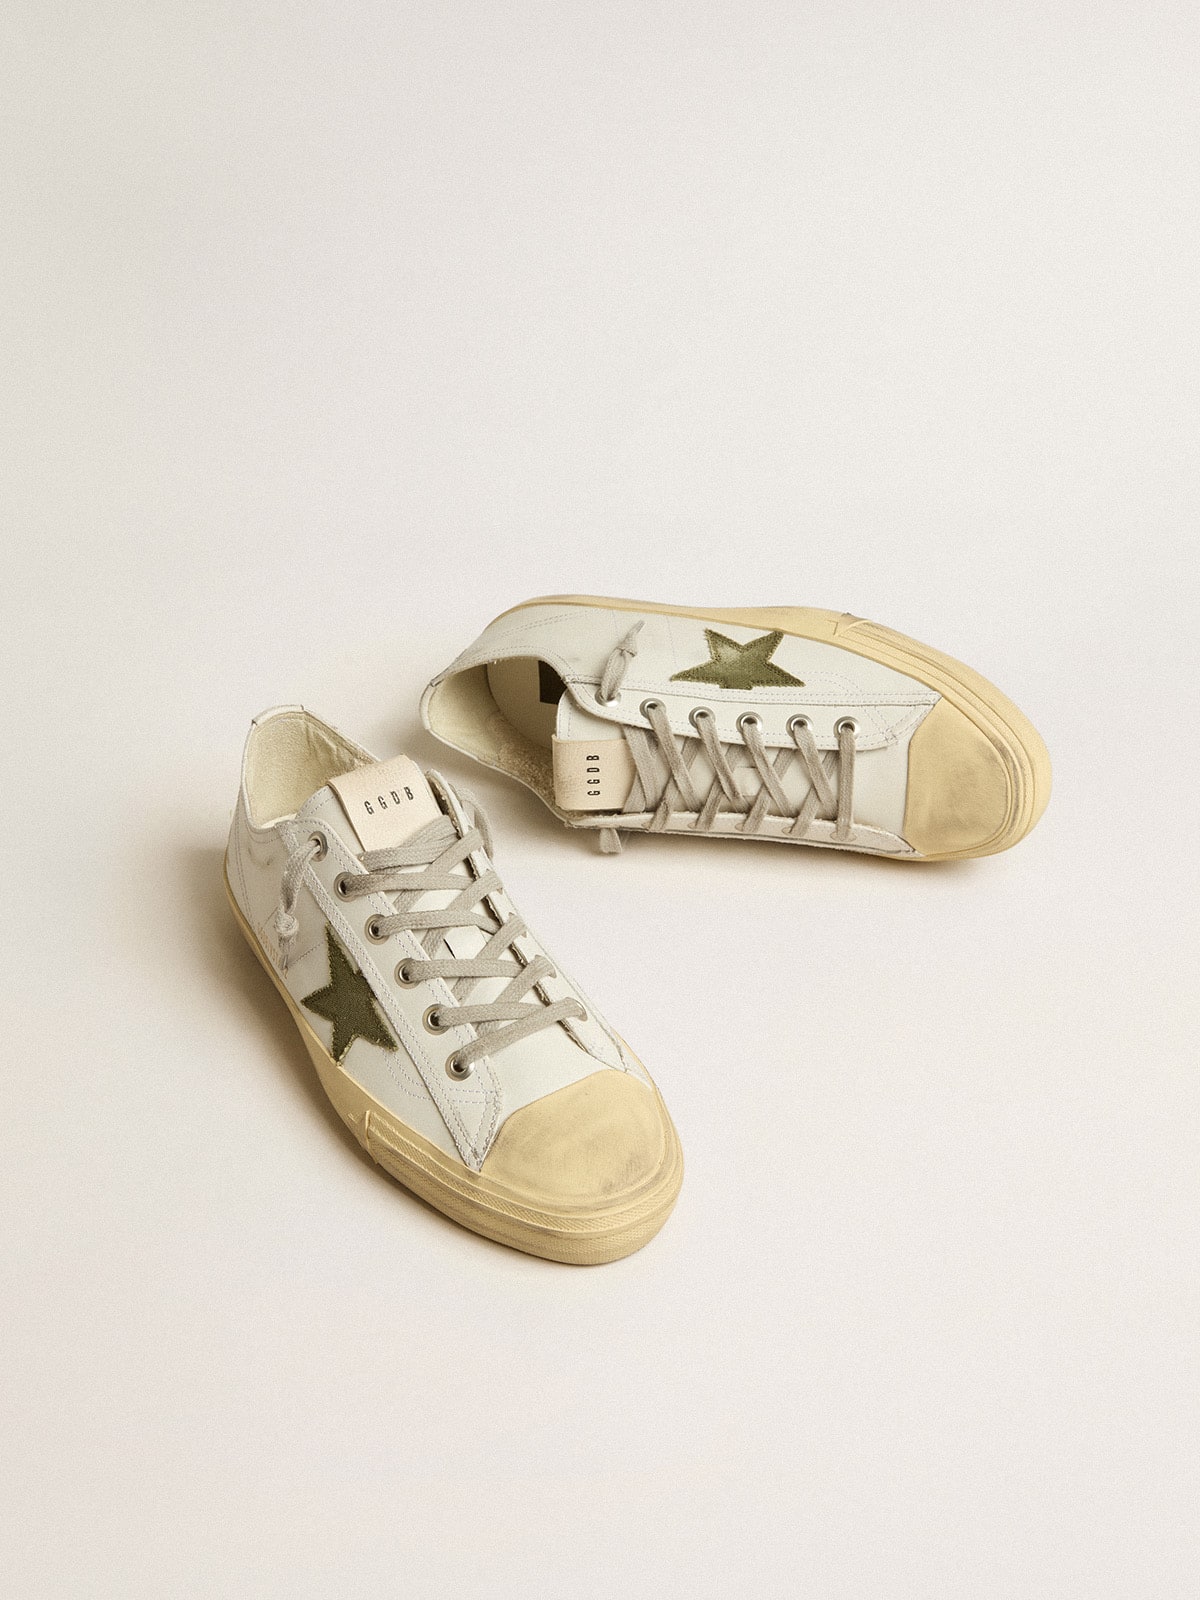 Men's V-Star in white leather with green canvas star